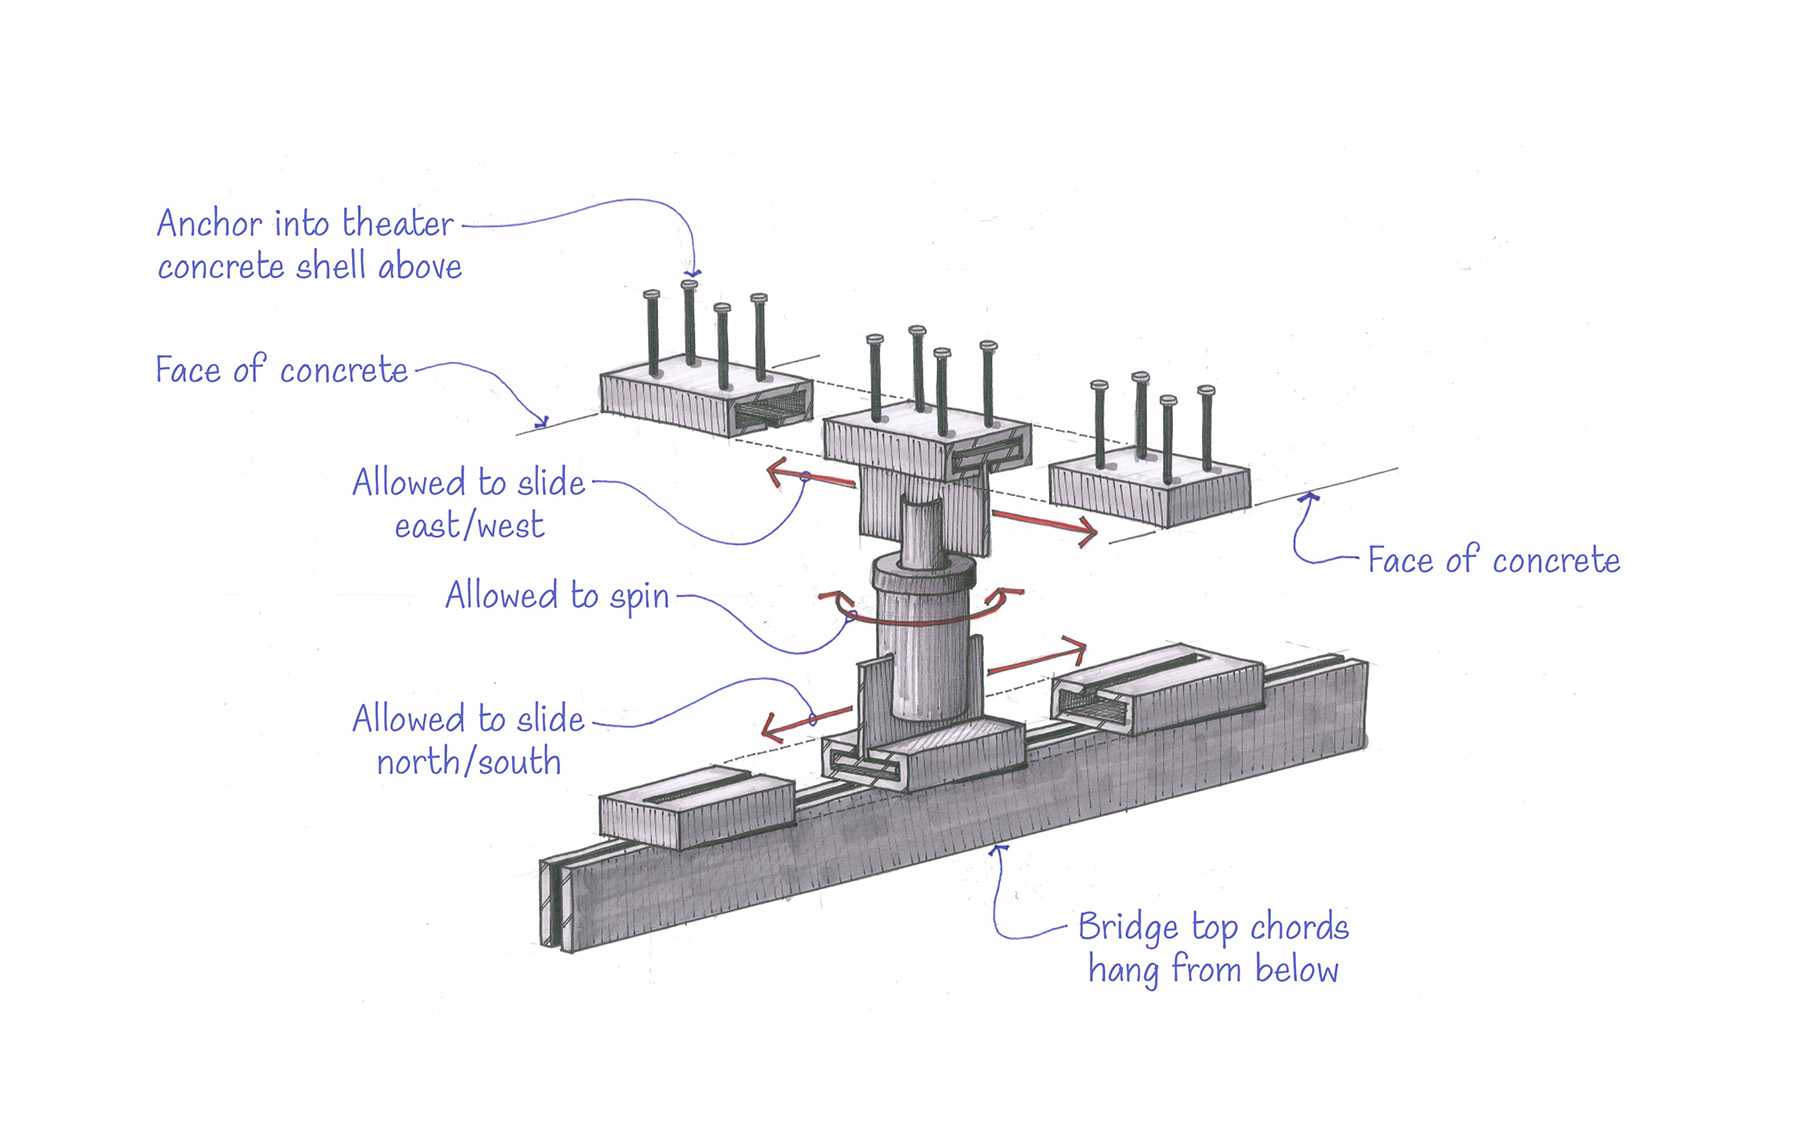 Image of a sliding bridge’s parts including the anchors, concrete faces, the directions the bridge is allowed to move in (north and south and east and west)